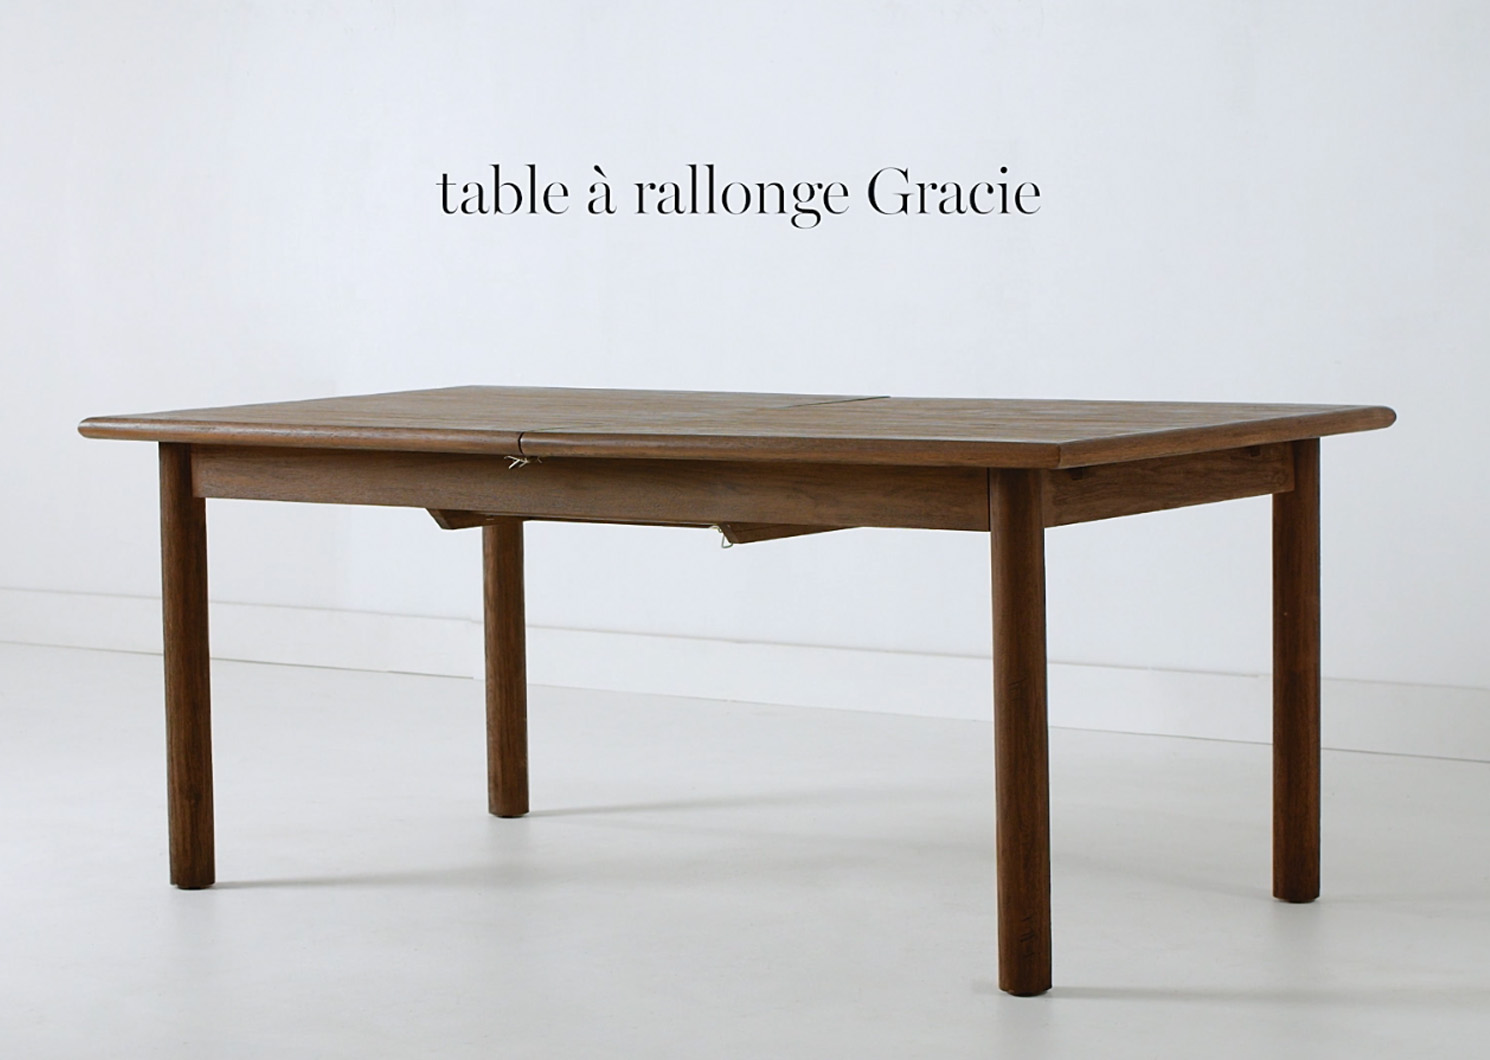 Table à rallonge Gracie -Aster gingembre